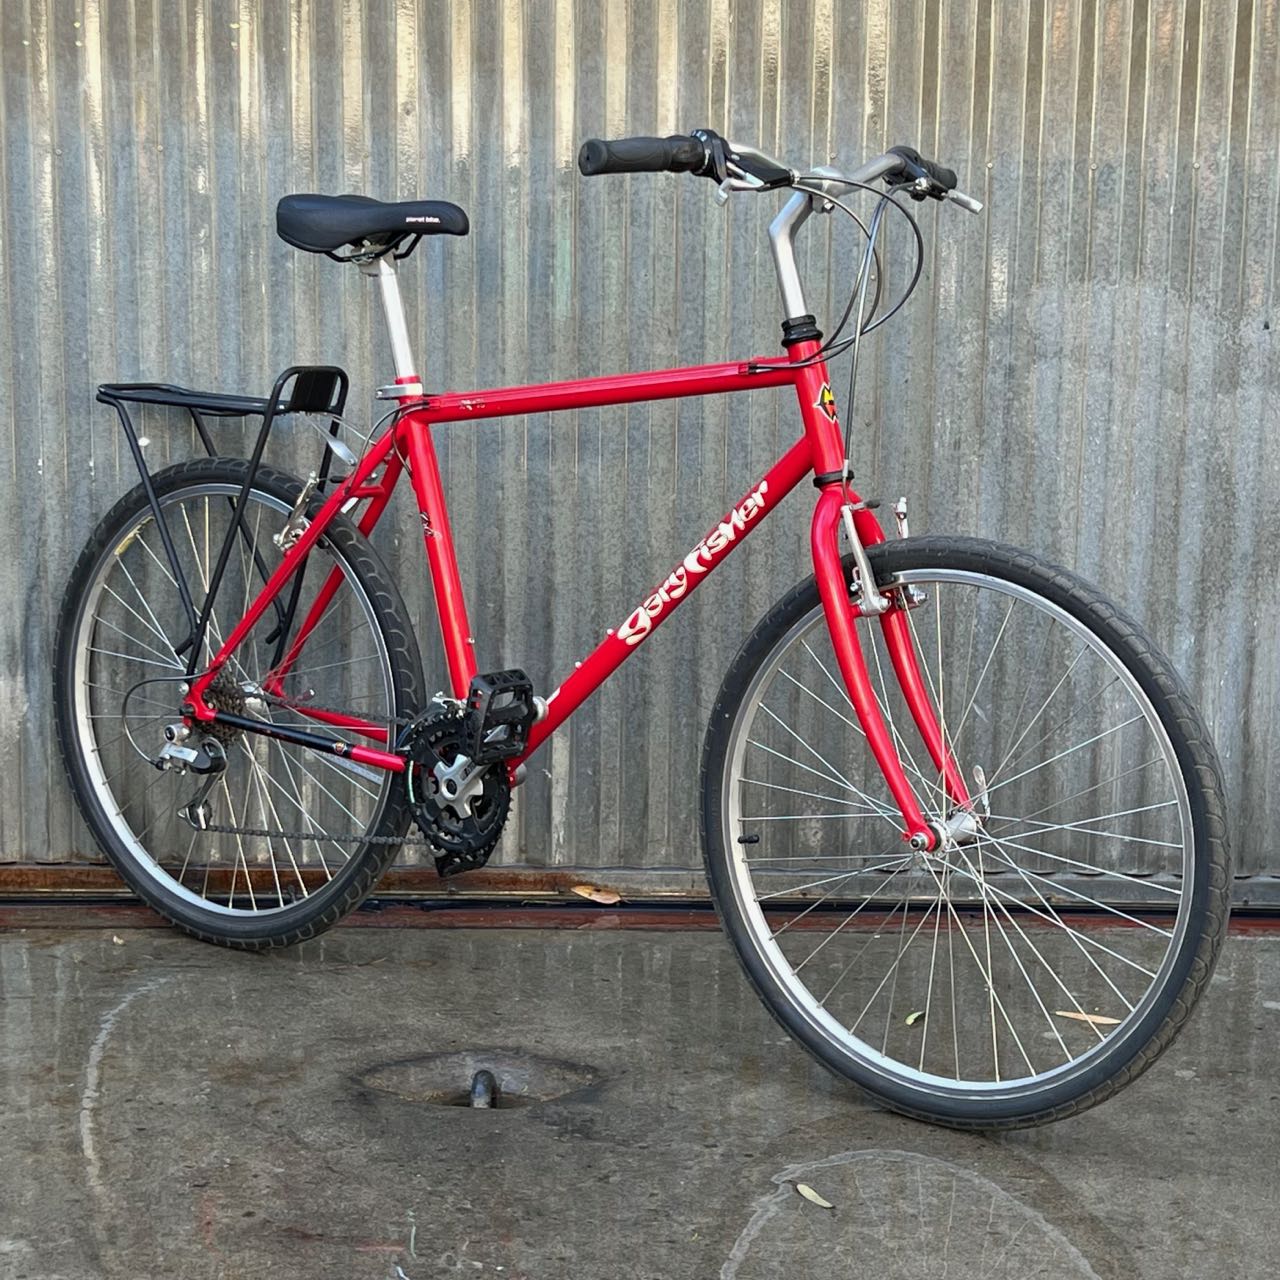 Used Gary Fisher Mountain Bike in the City Slaying Style